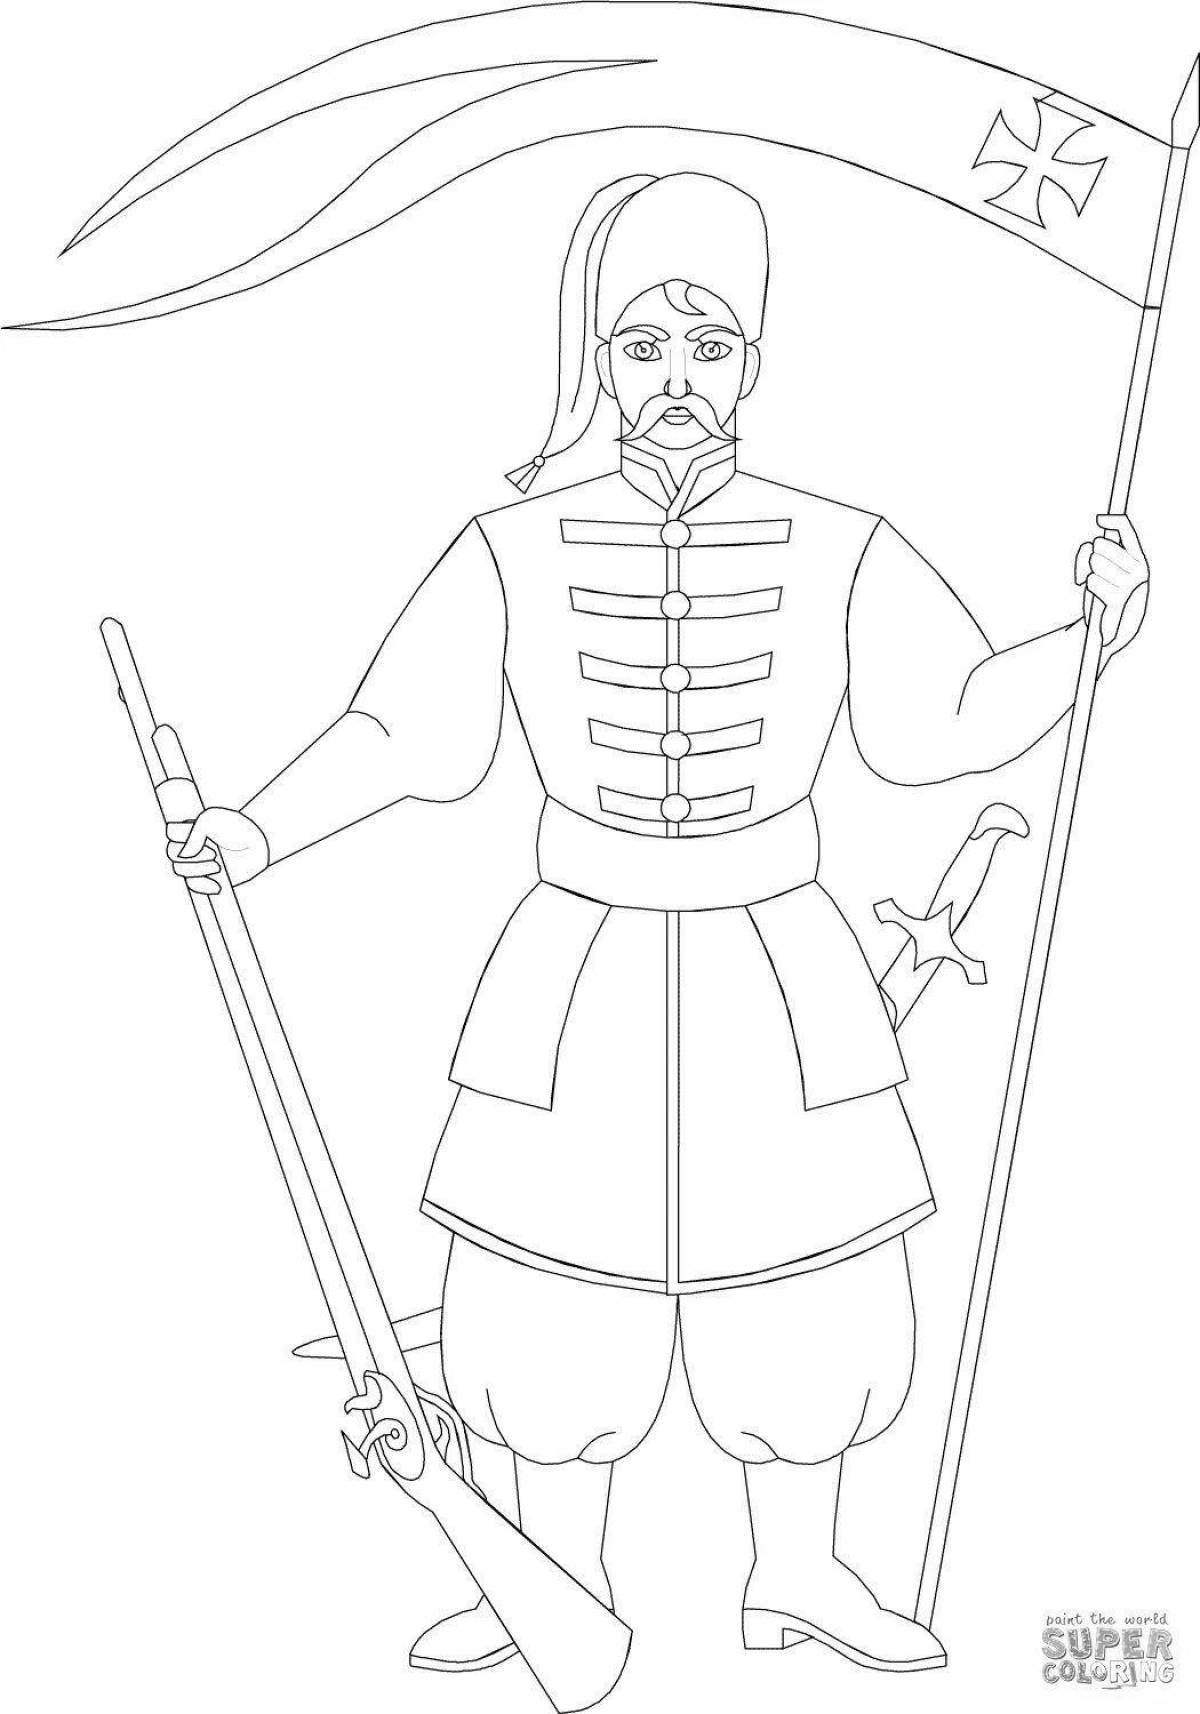 Coloring page jubilant Don Cossacks